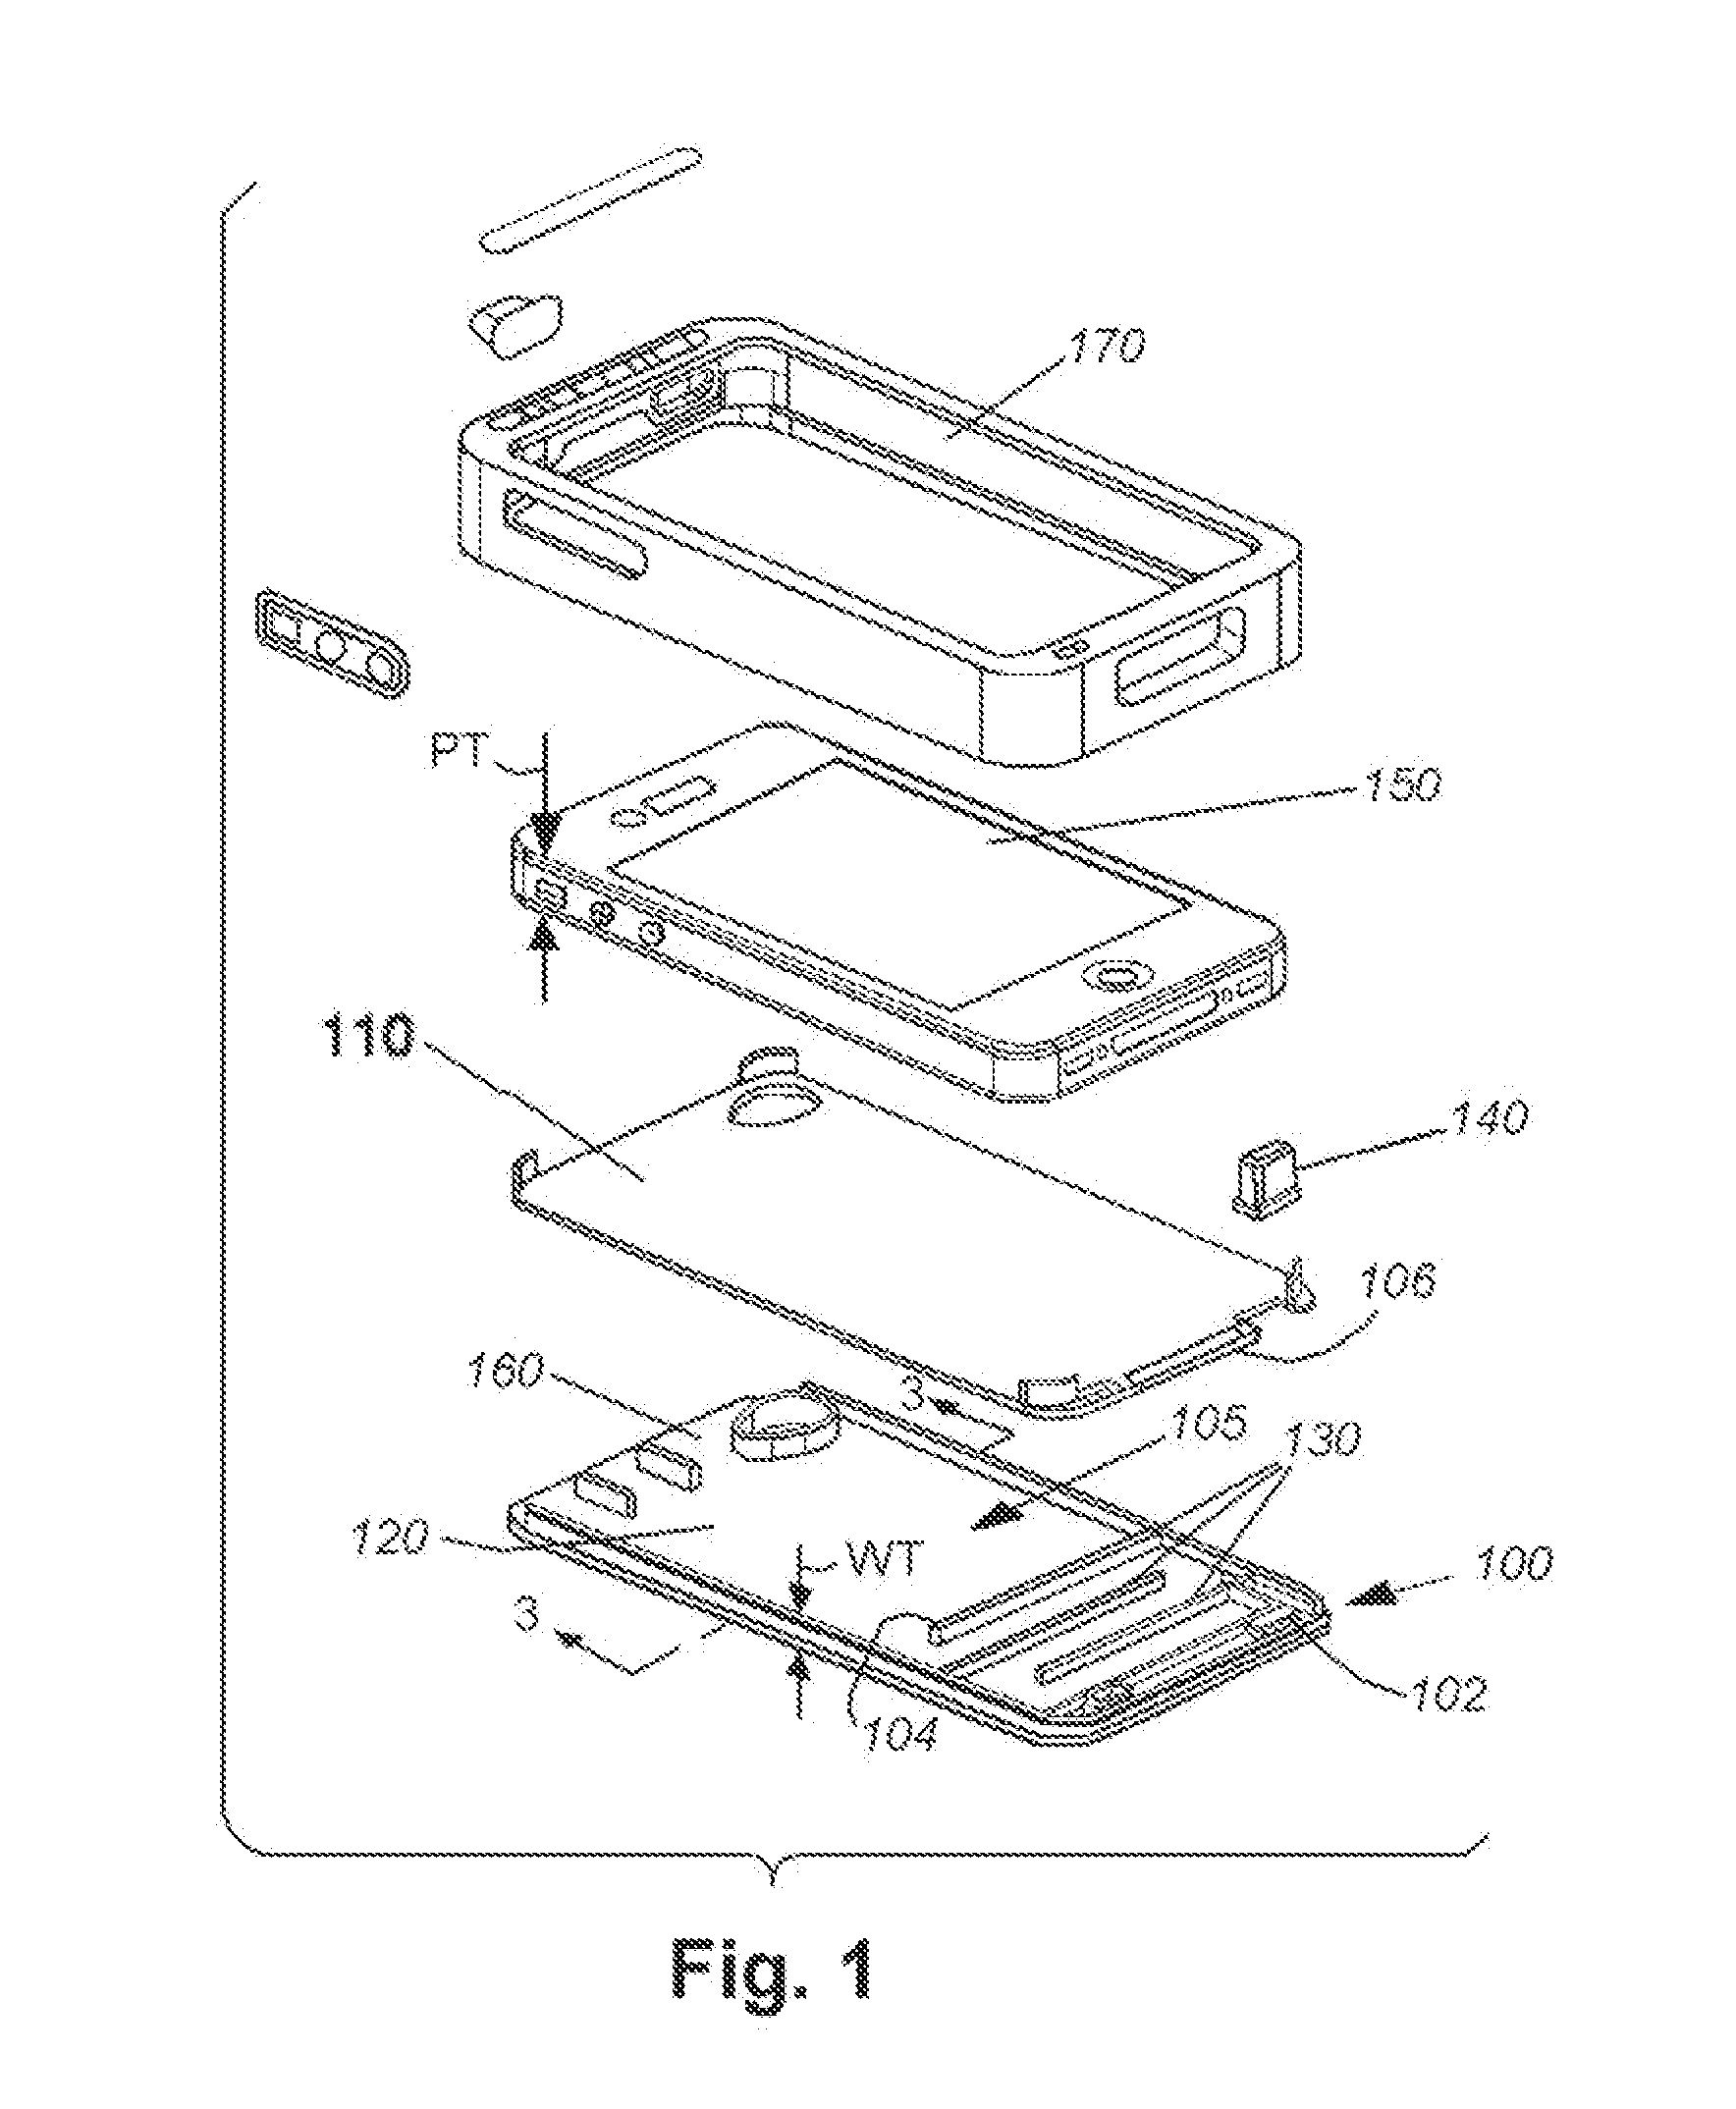 Amplifying cover for a portable audio device